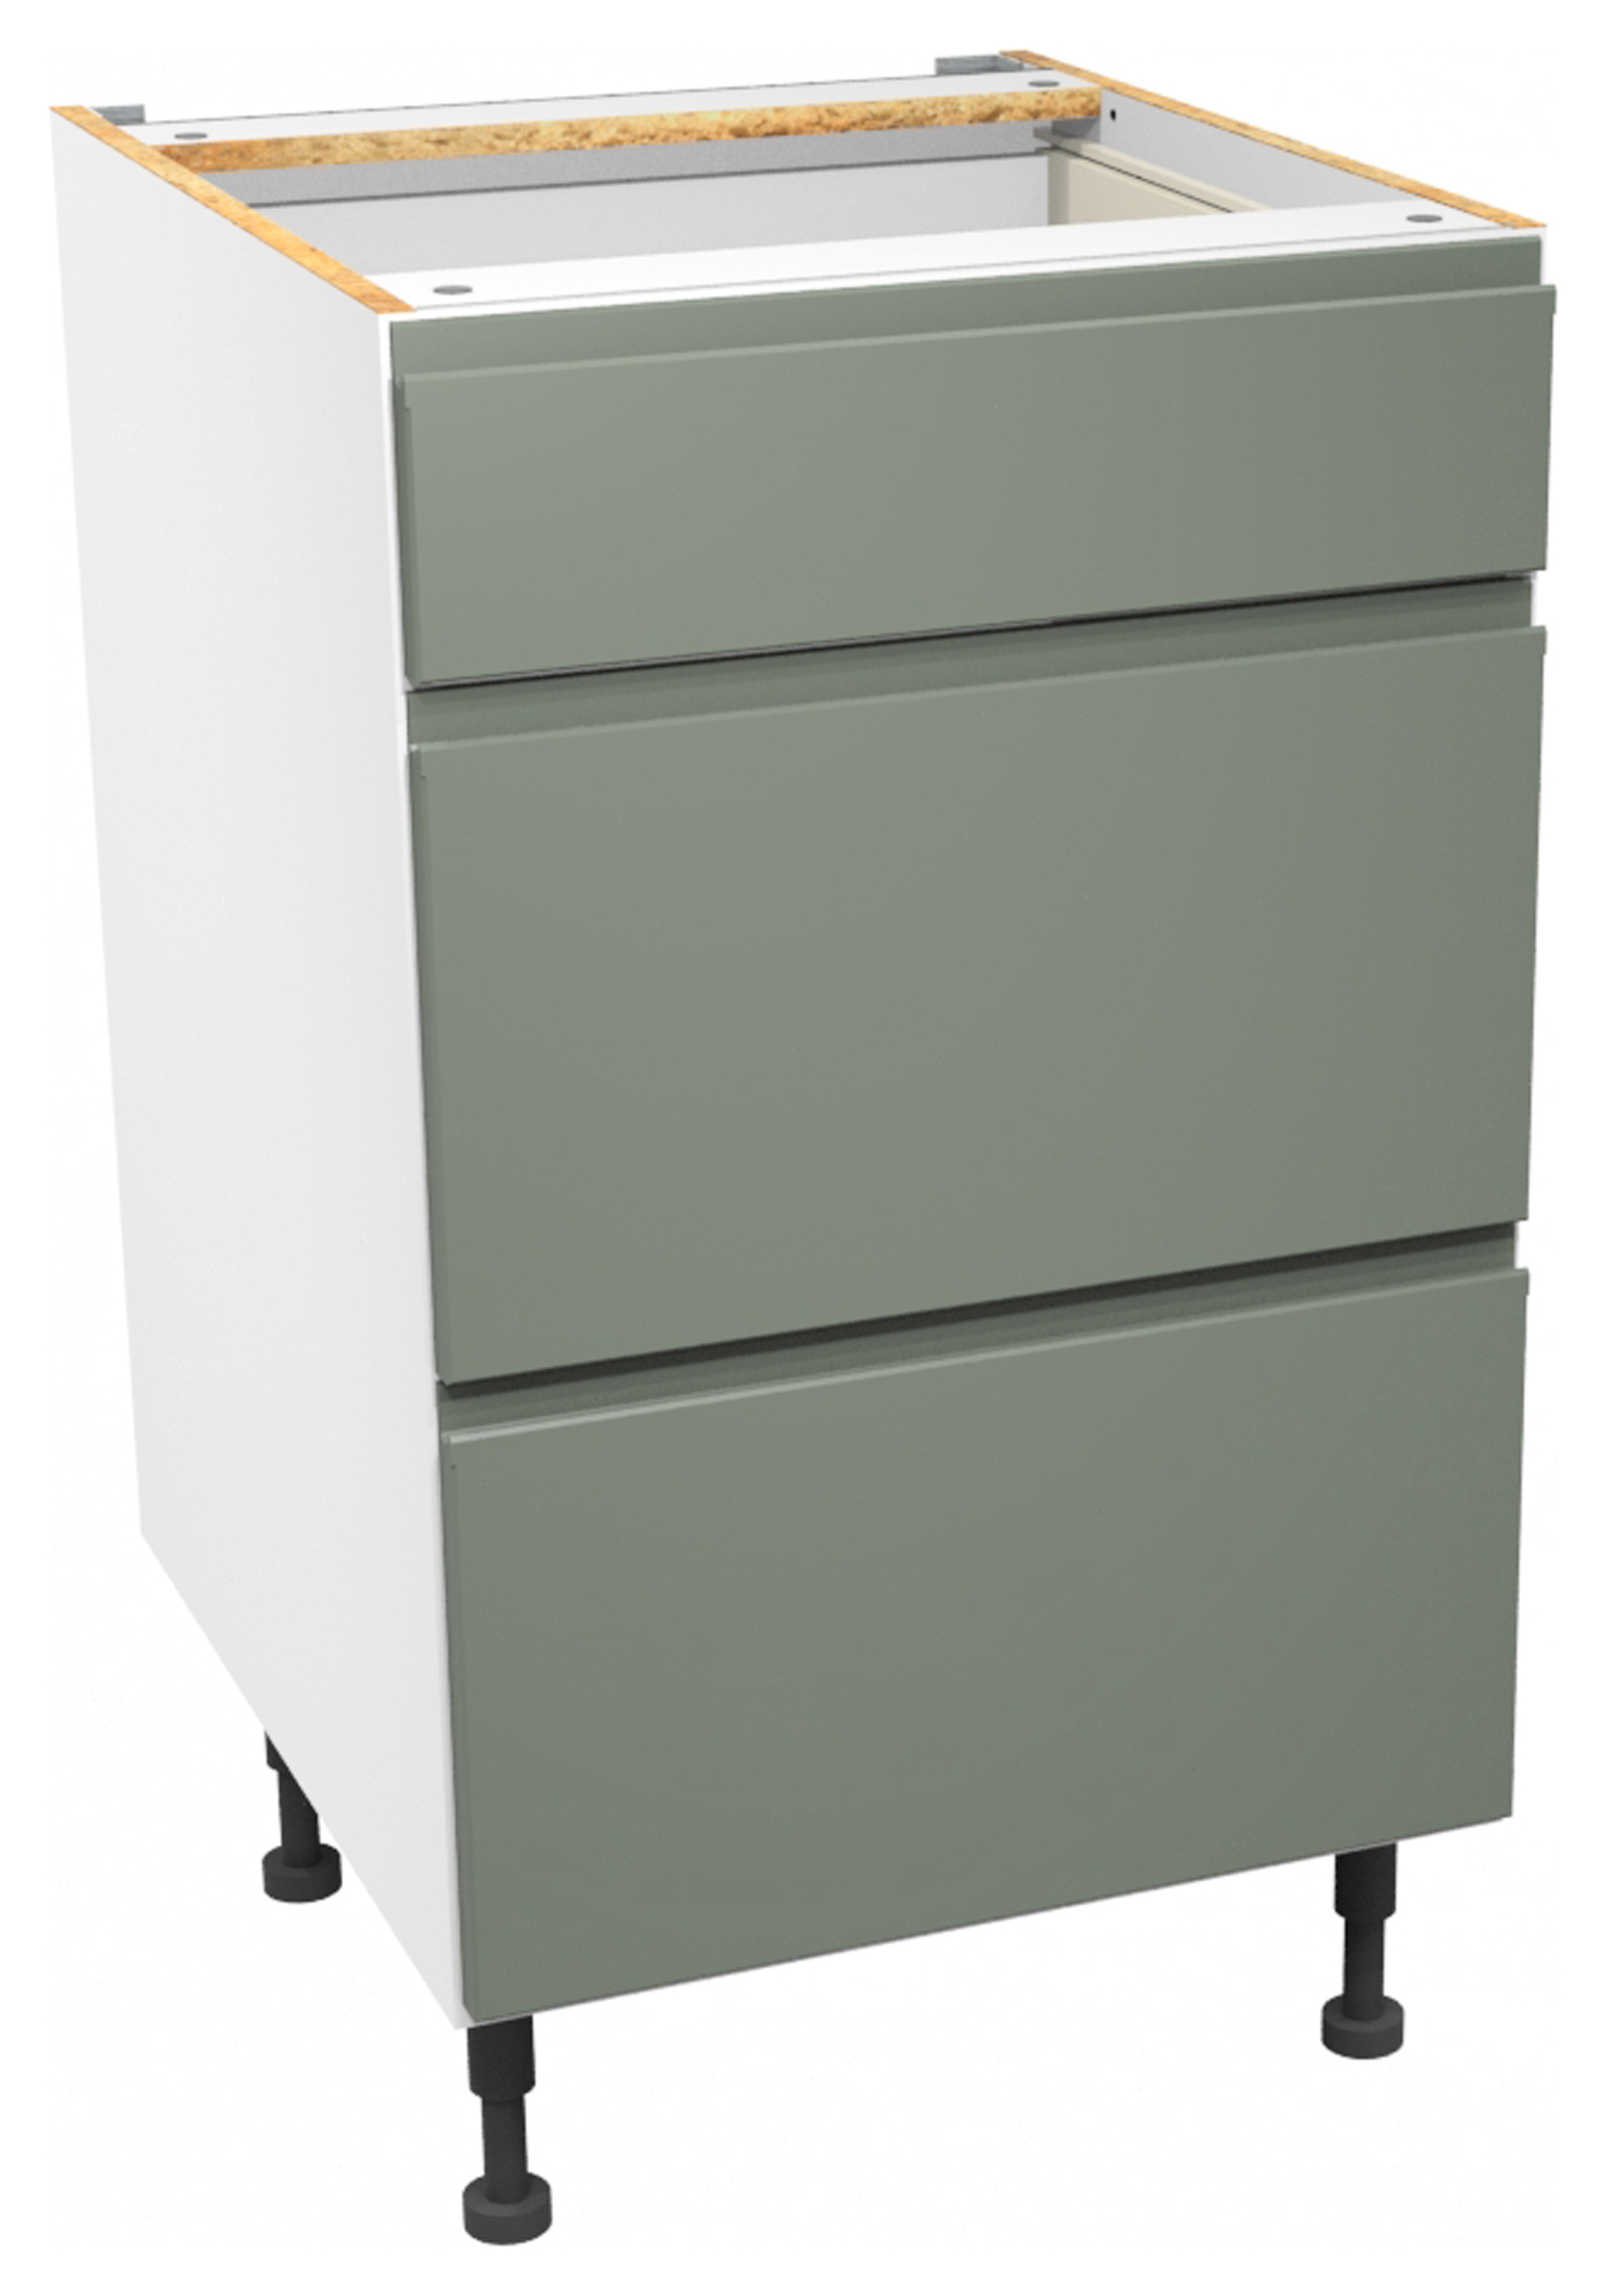 Image of Wickes Madison Reed Green Drawer Unit - 500mm